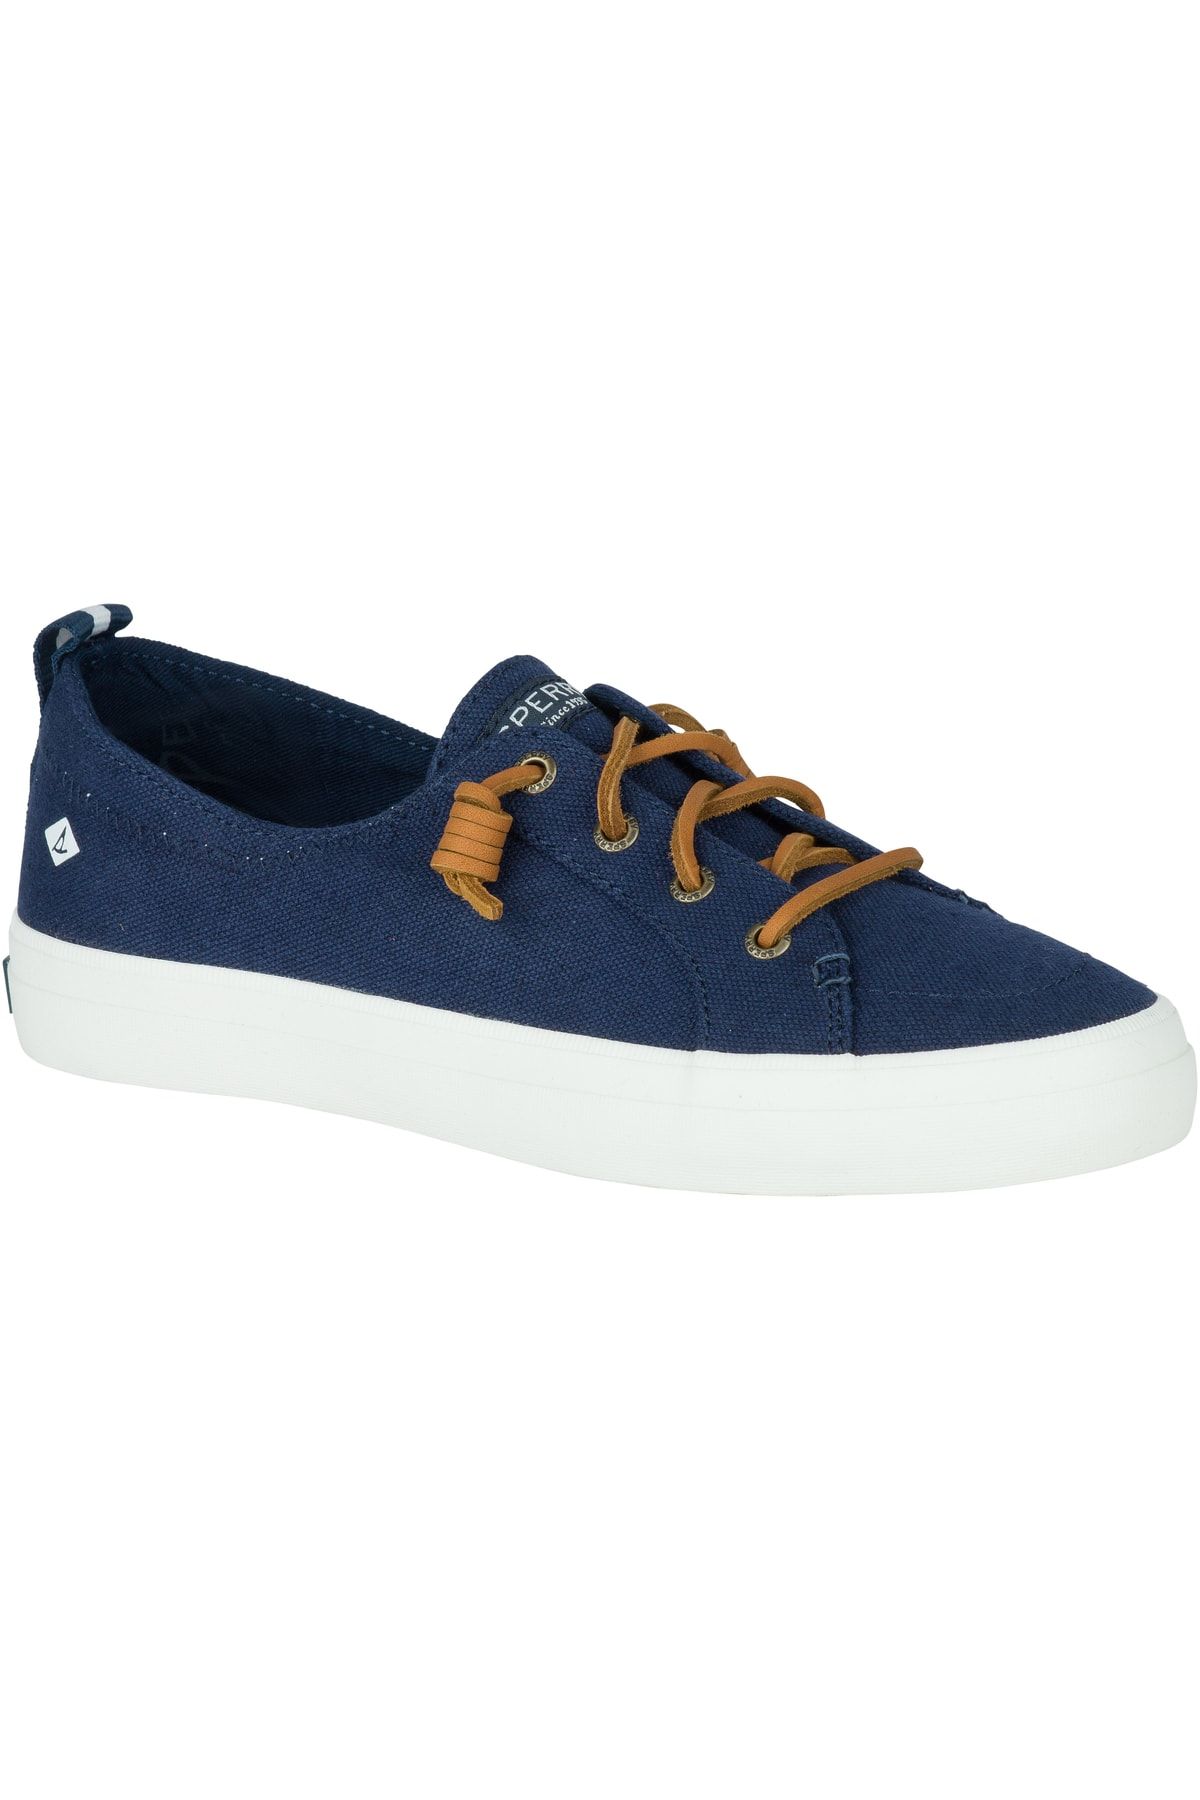 Sperry Top-Sider Crest Vibe